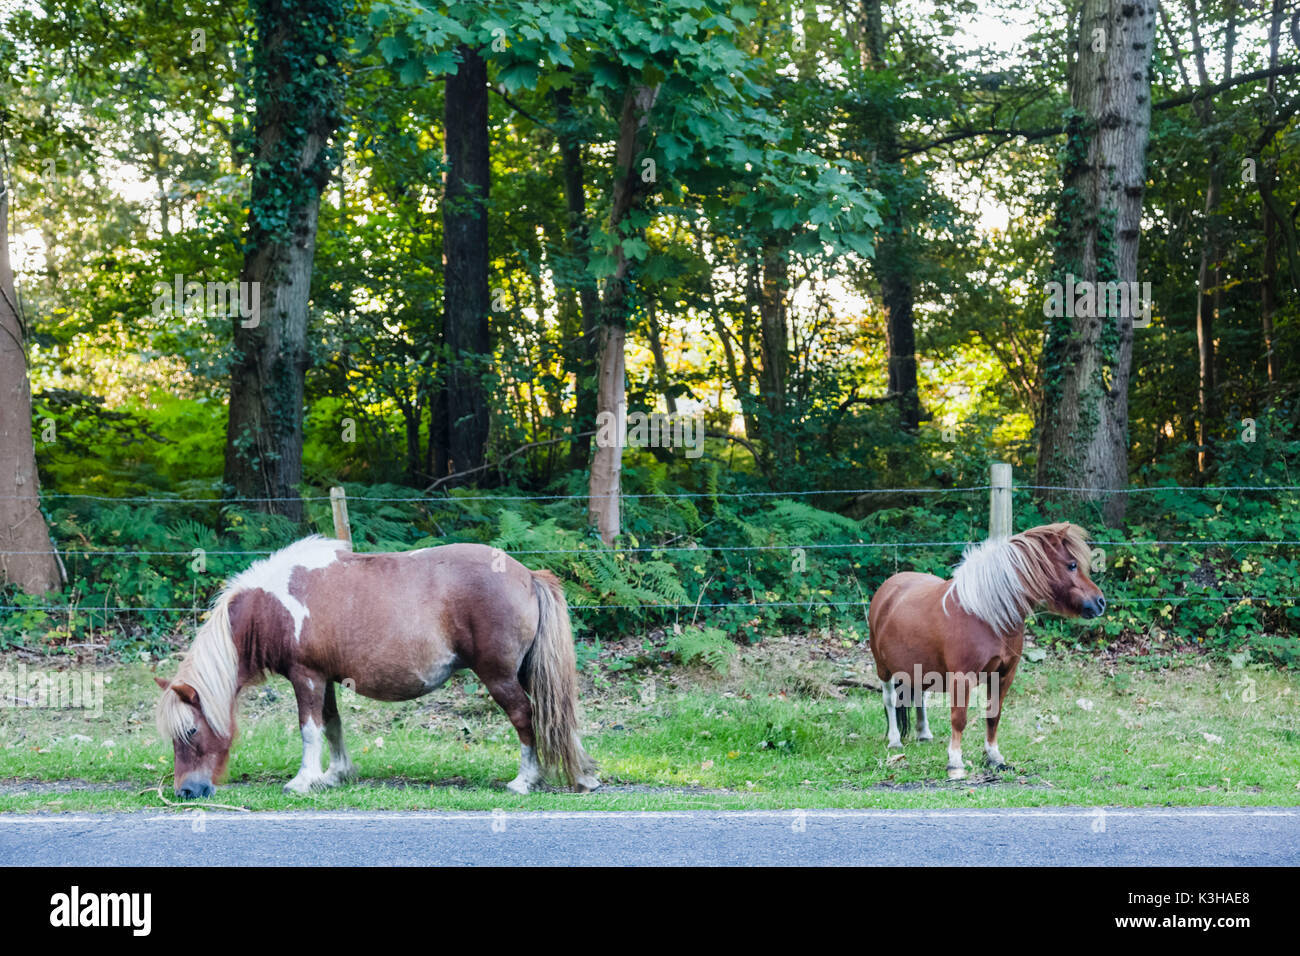 England, Hampshire, New Forest, Ponies Grazing on Roadside Stock Photo